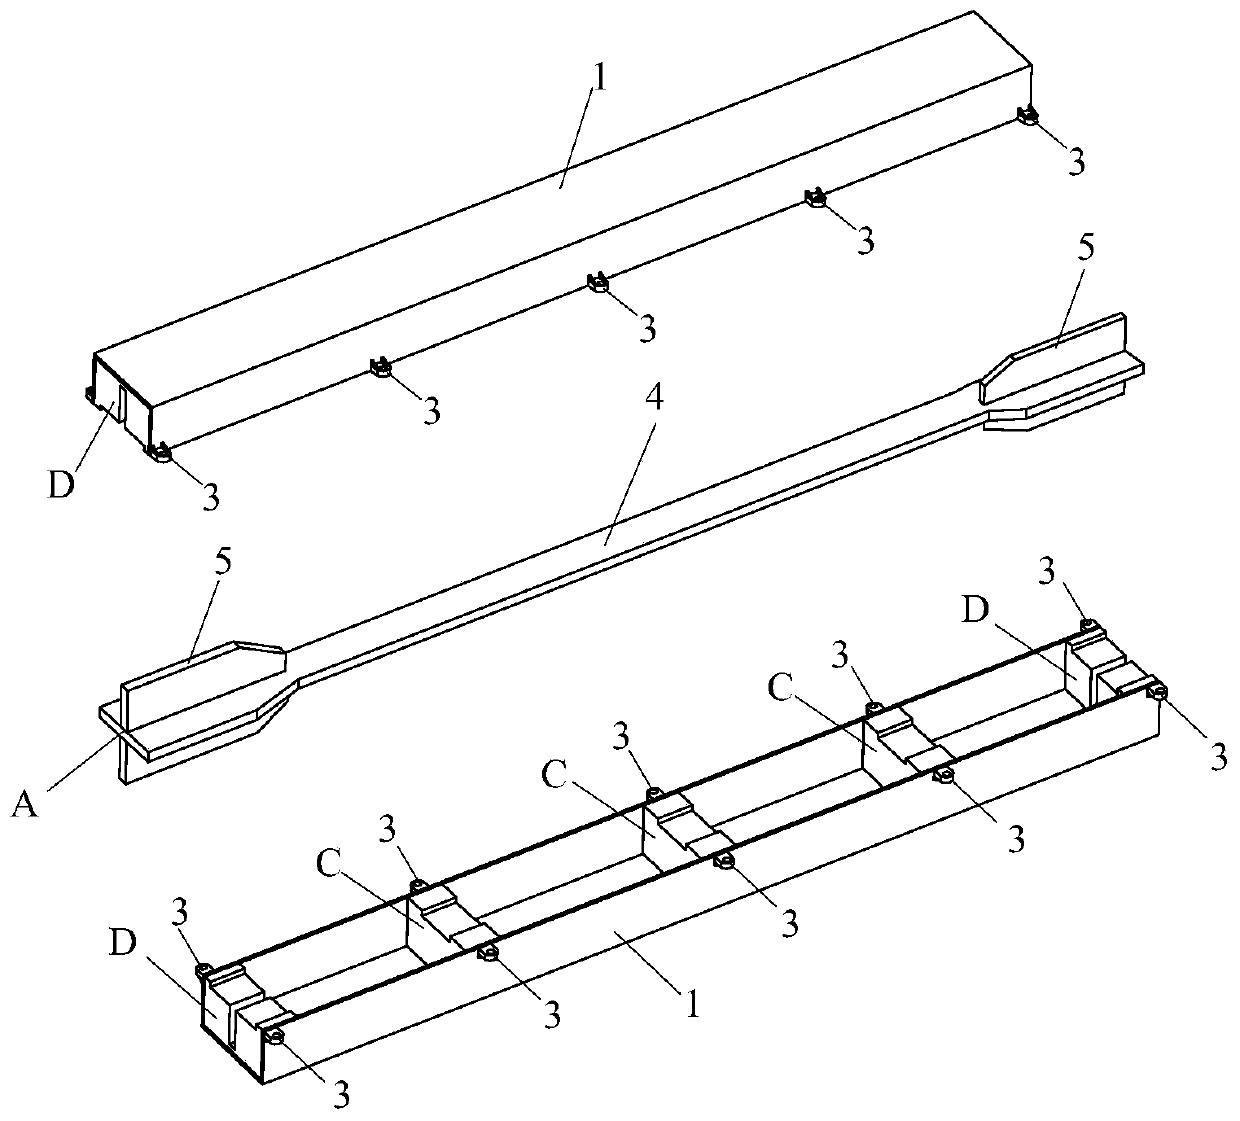 Fabricated buckling restraint supporting component